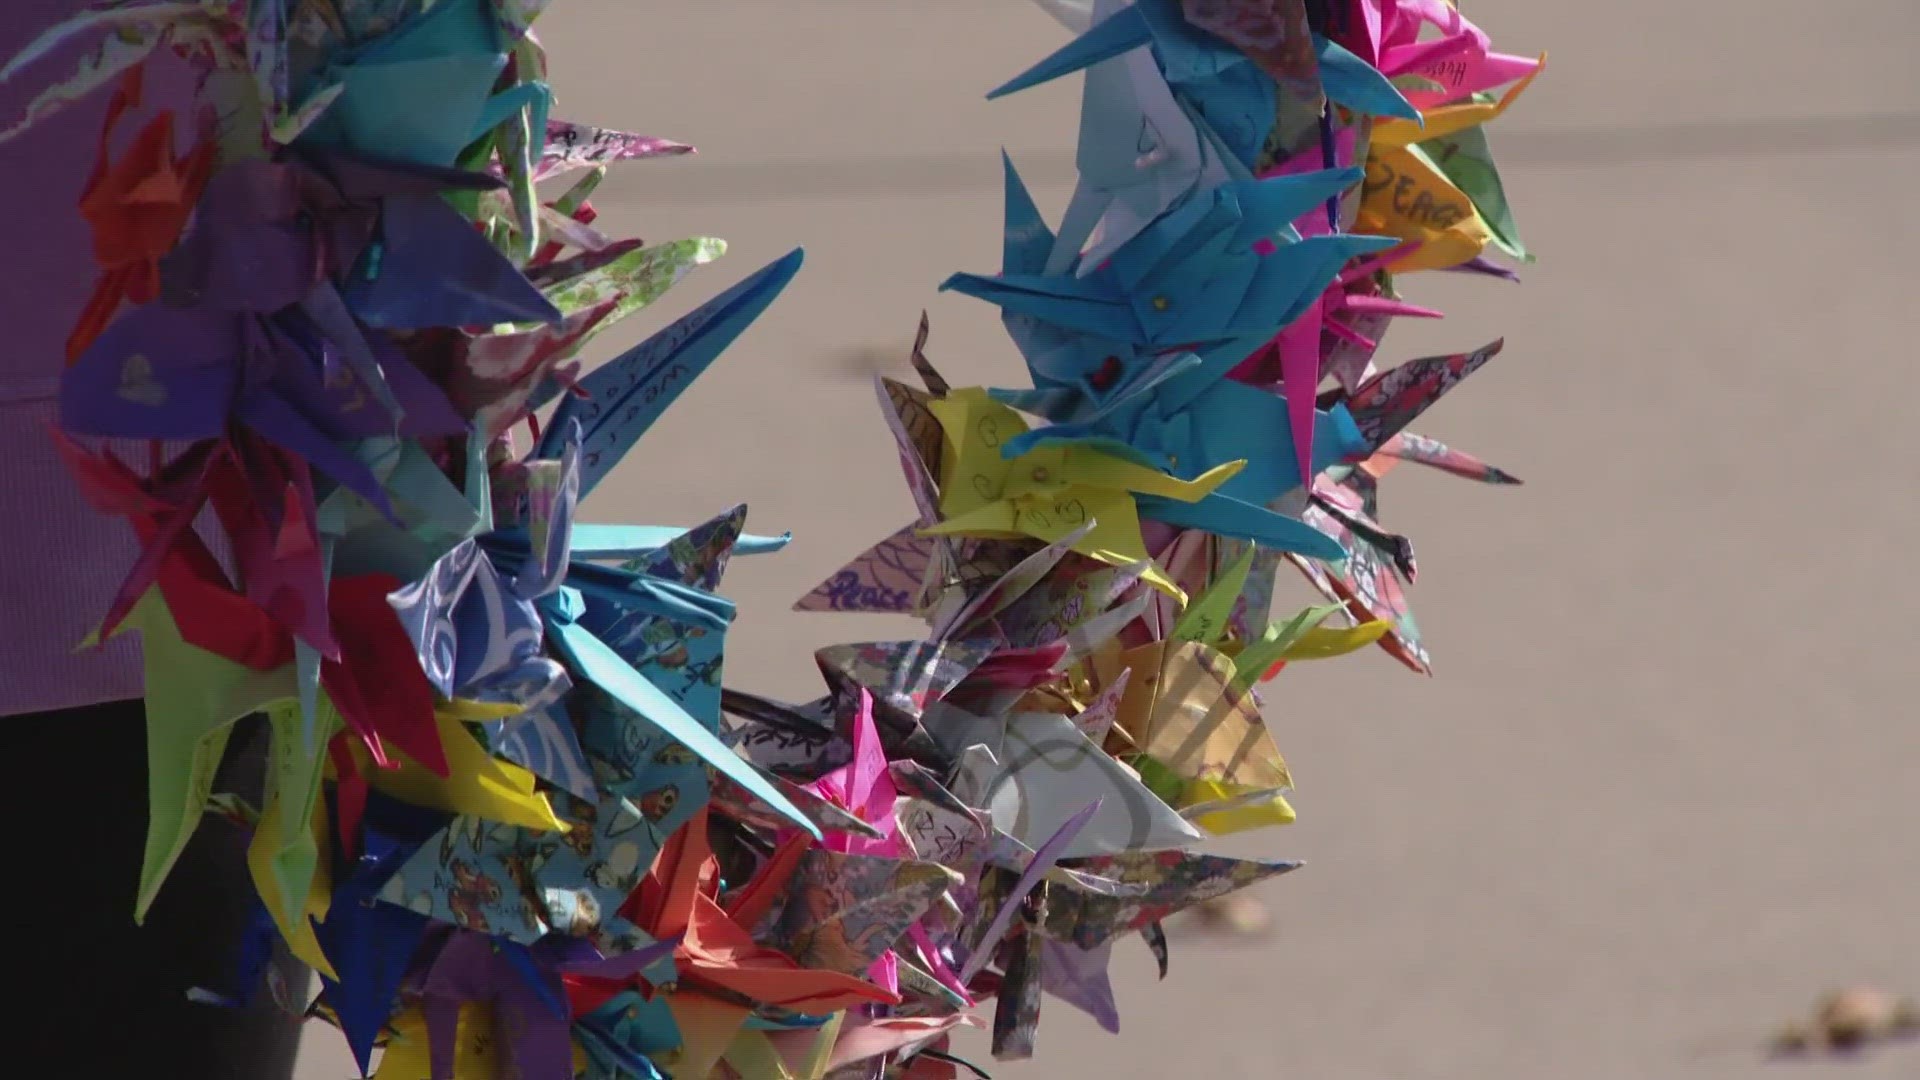 Through the 7/20 Memorial Foundation, members of the Aurora community send paper crane wreaths with messages of love to communities impacted by mass shootings.